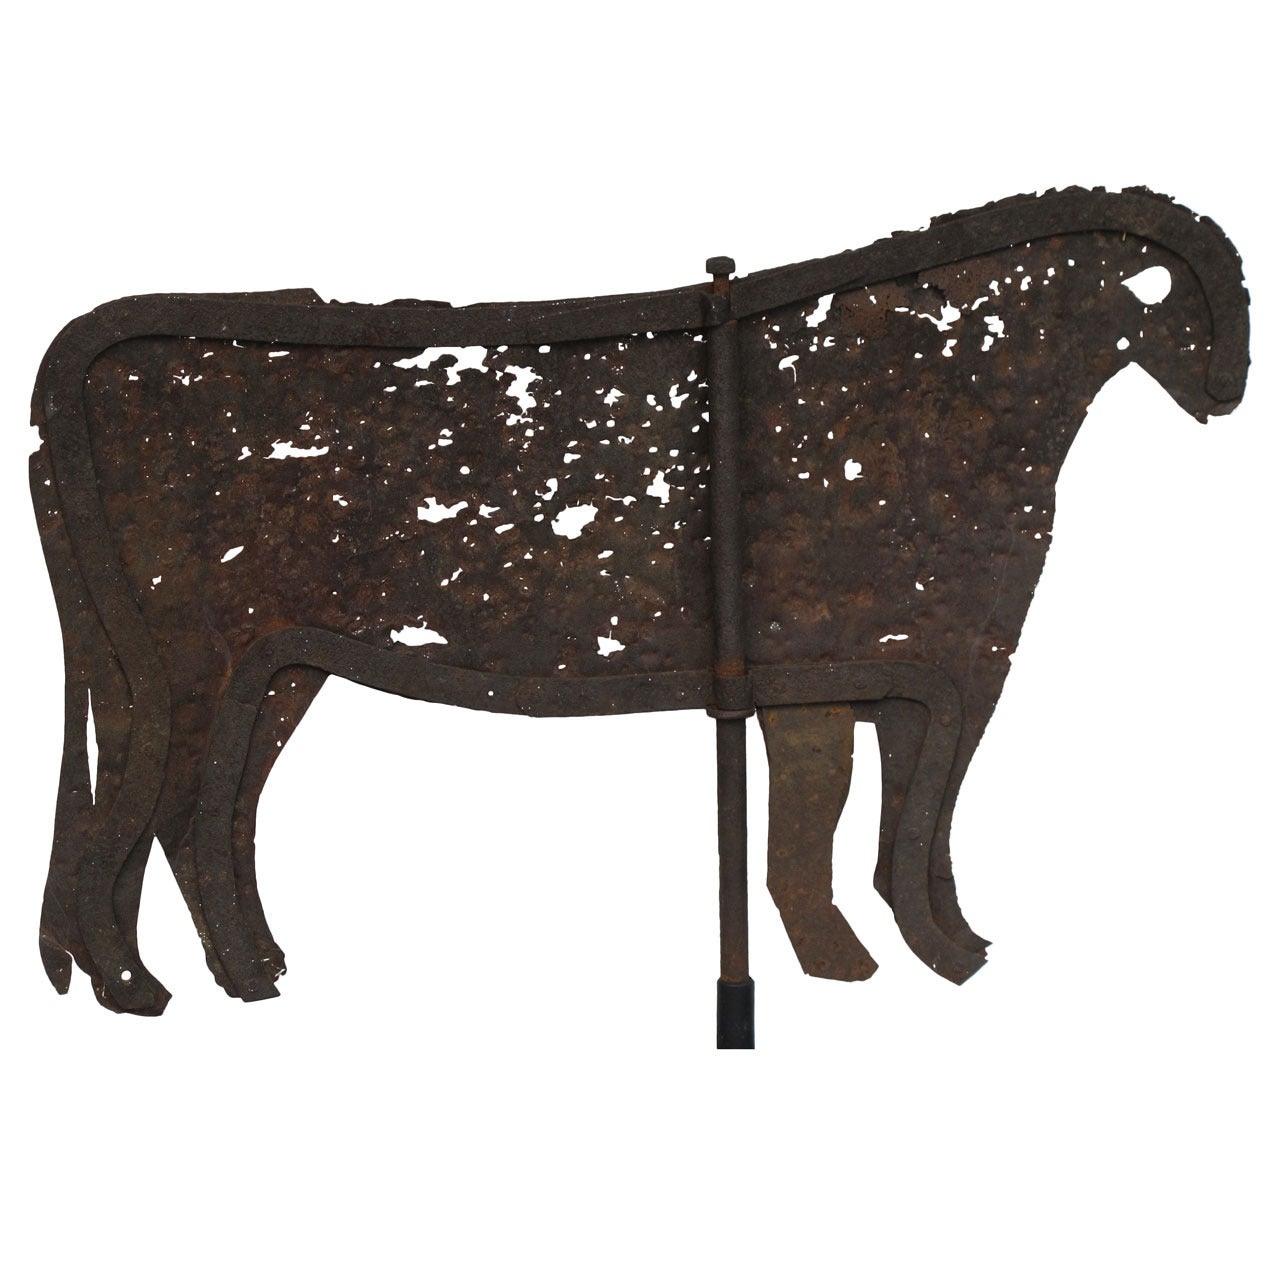 Primal Cow Weathervane For Sale